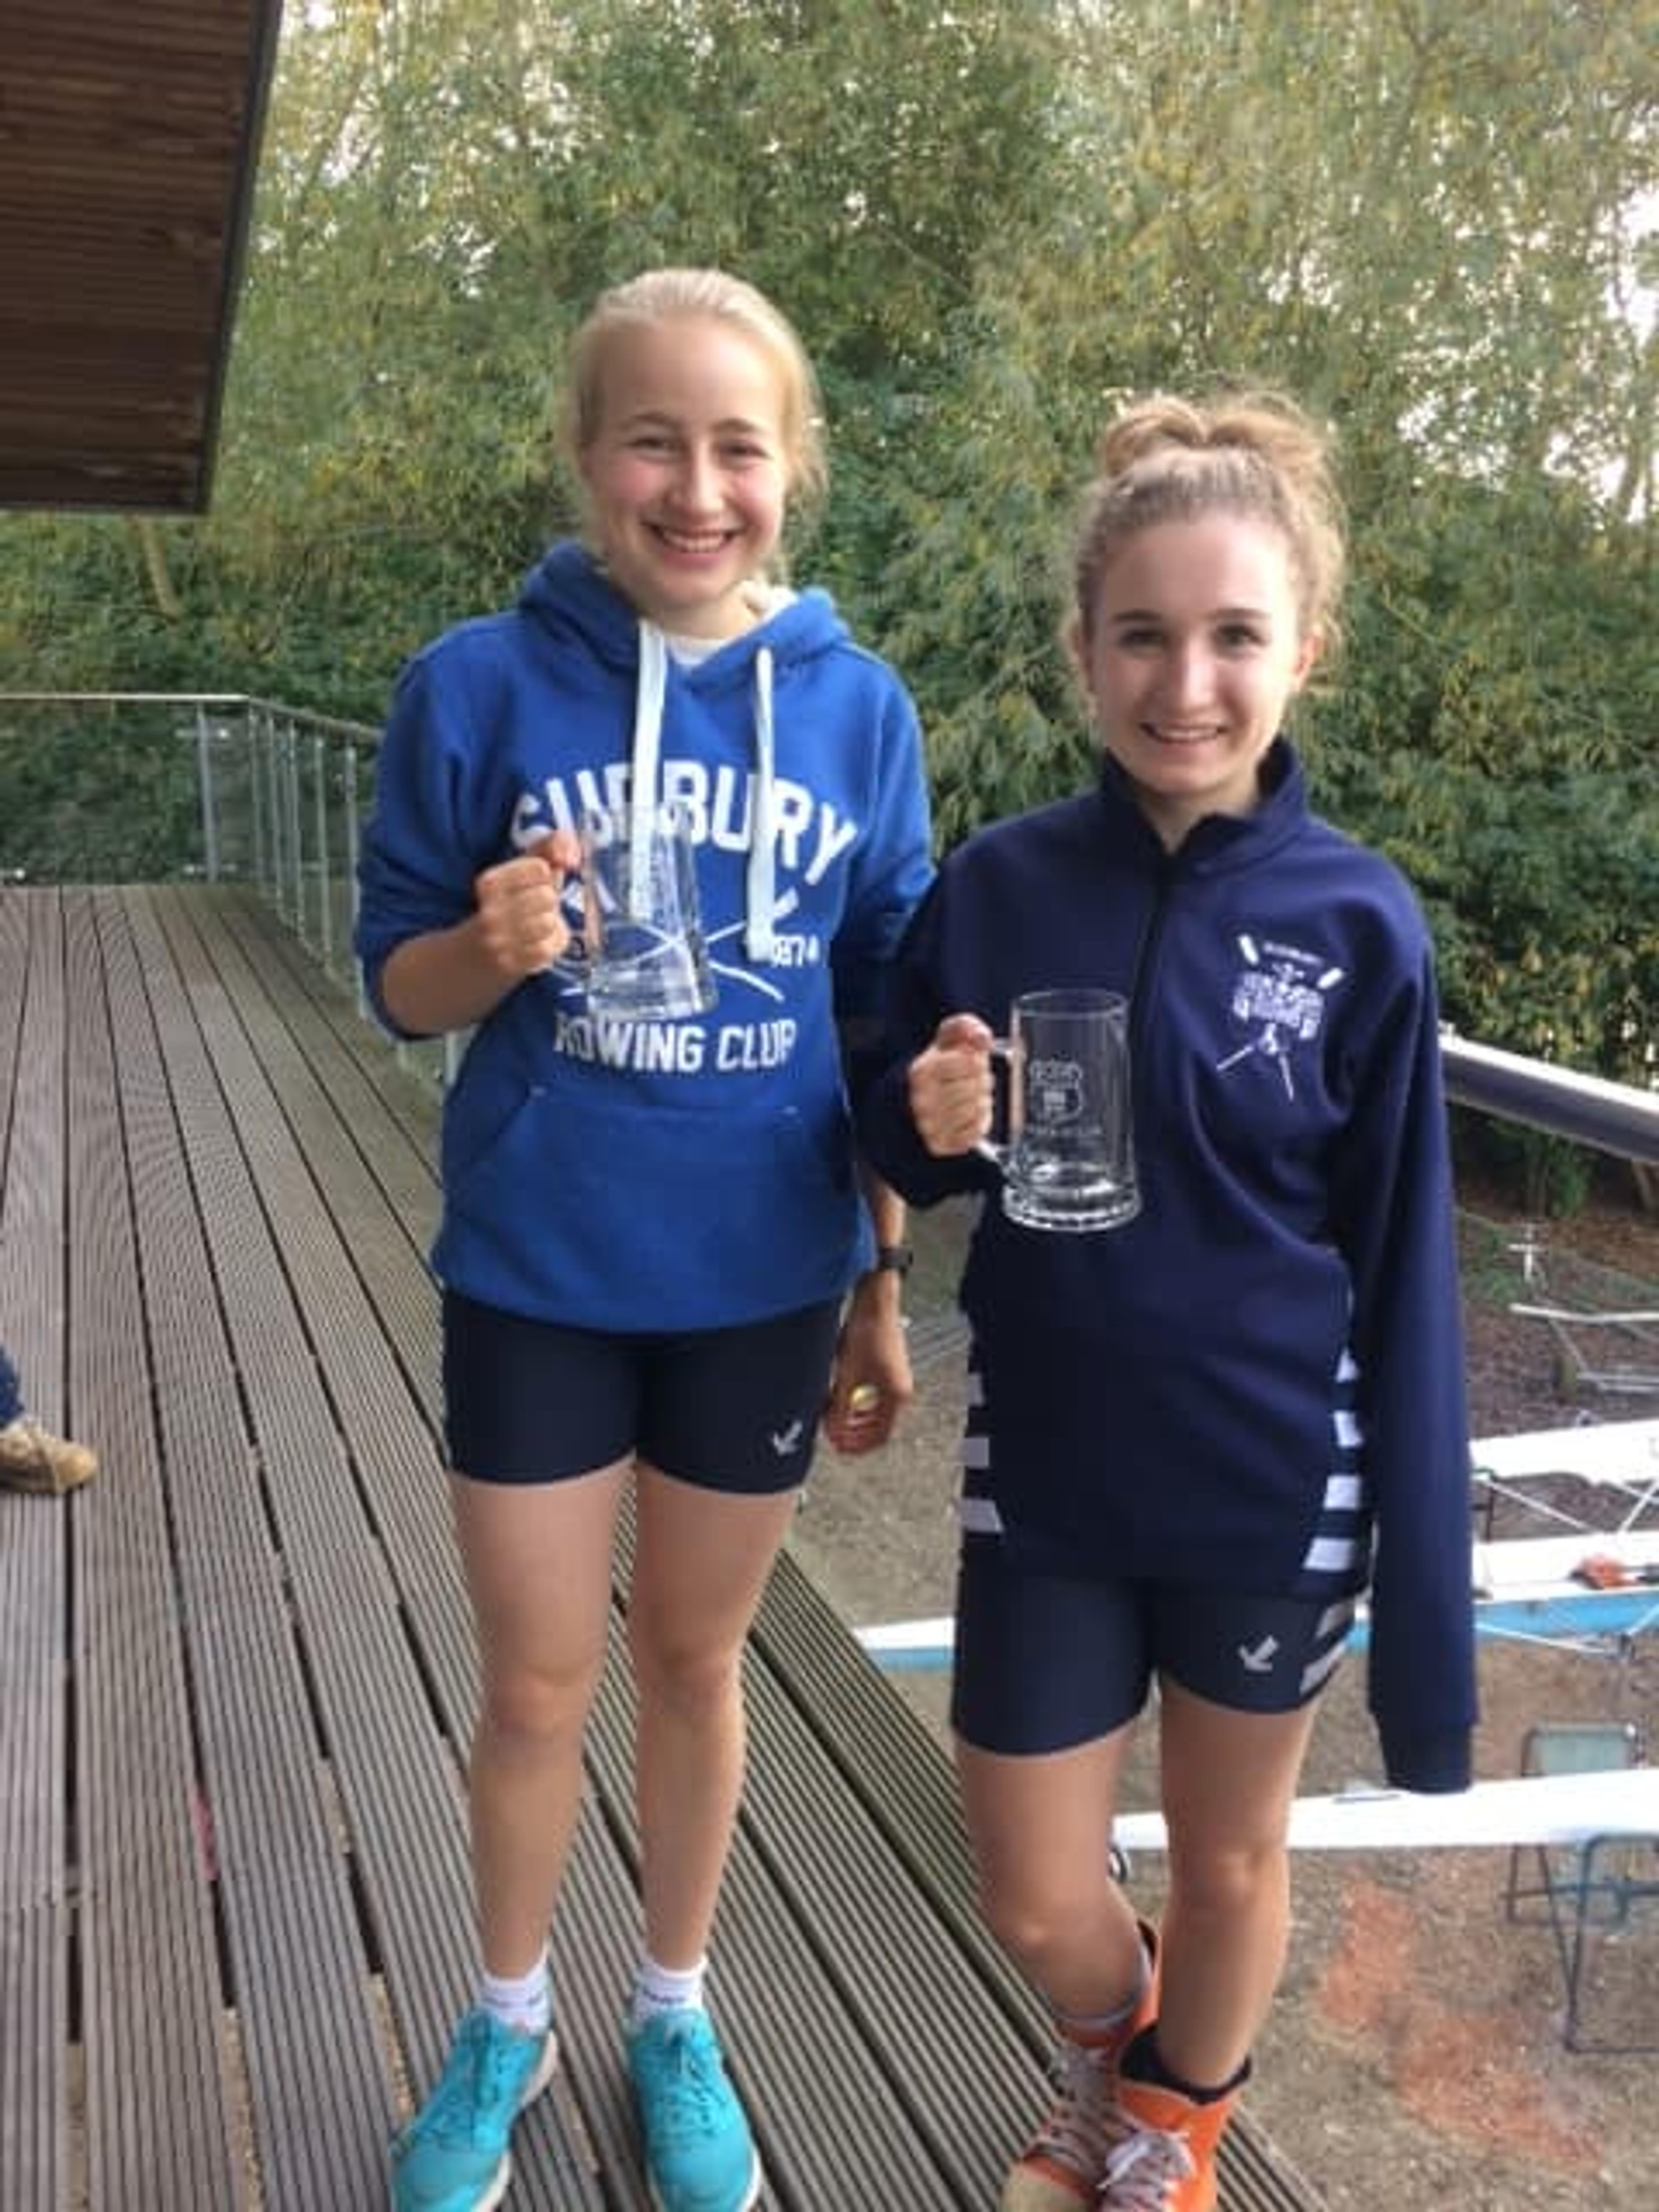 Natasha Treagust and Amelia Moule winners of Women's Junior 17 double sculls at Norfolk Sculls.